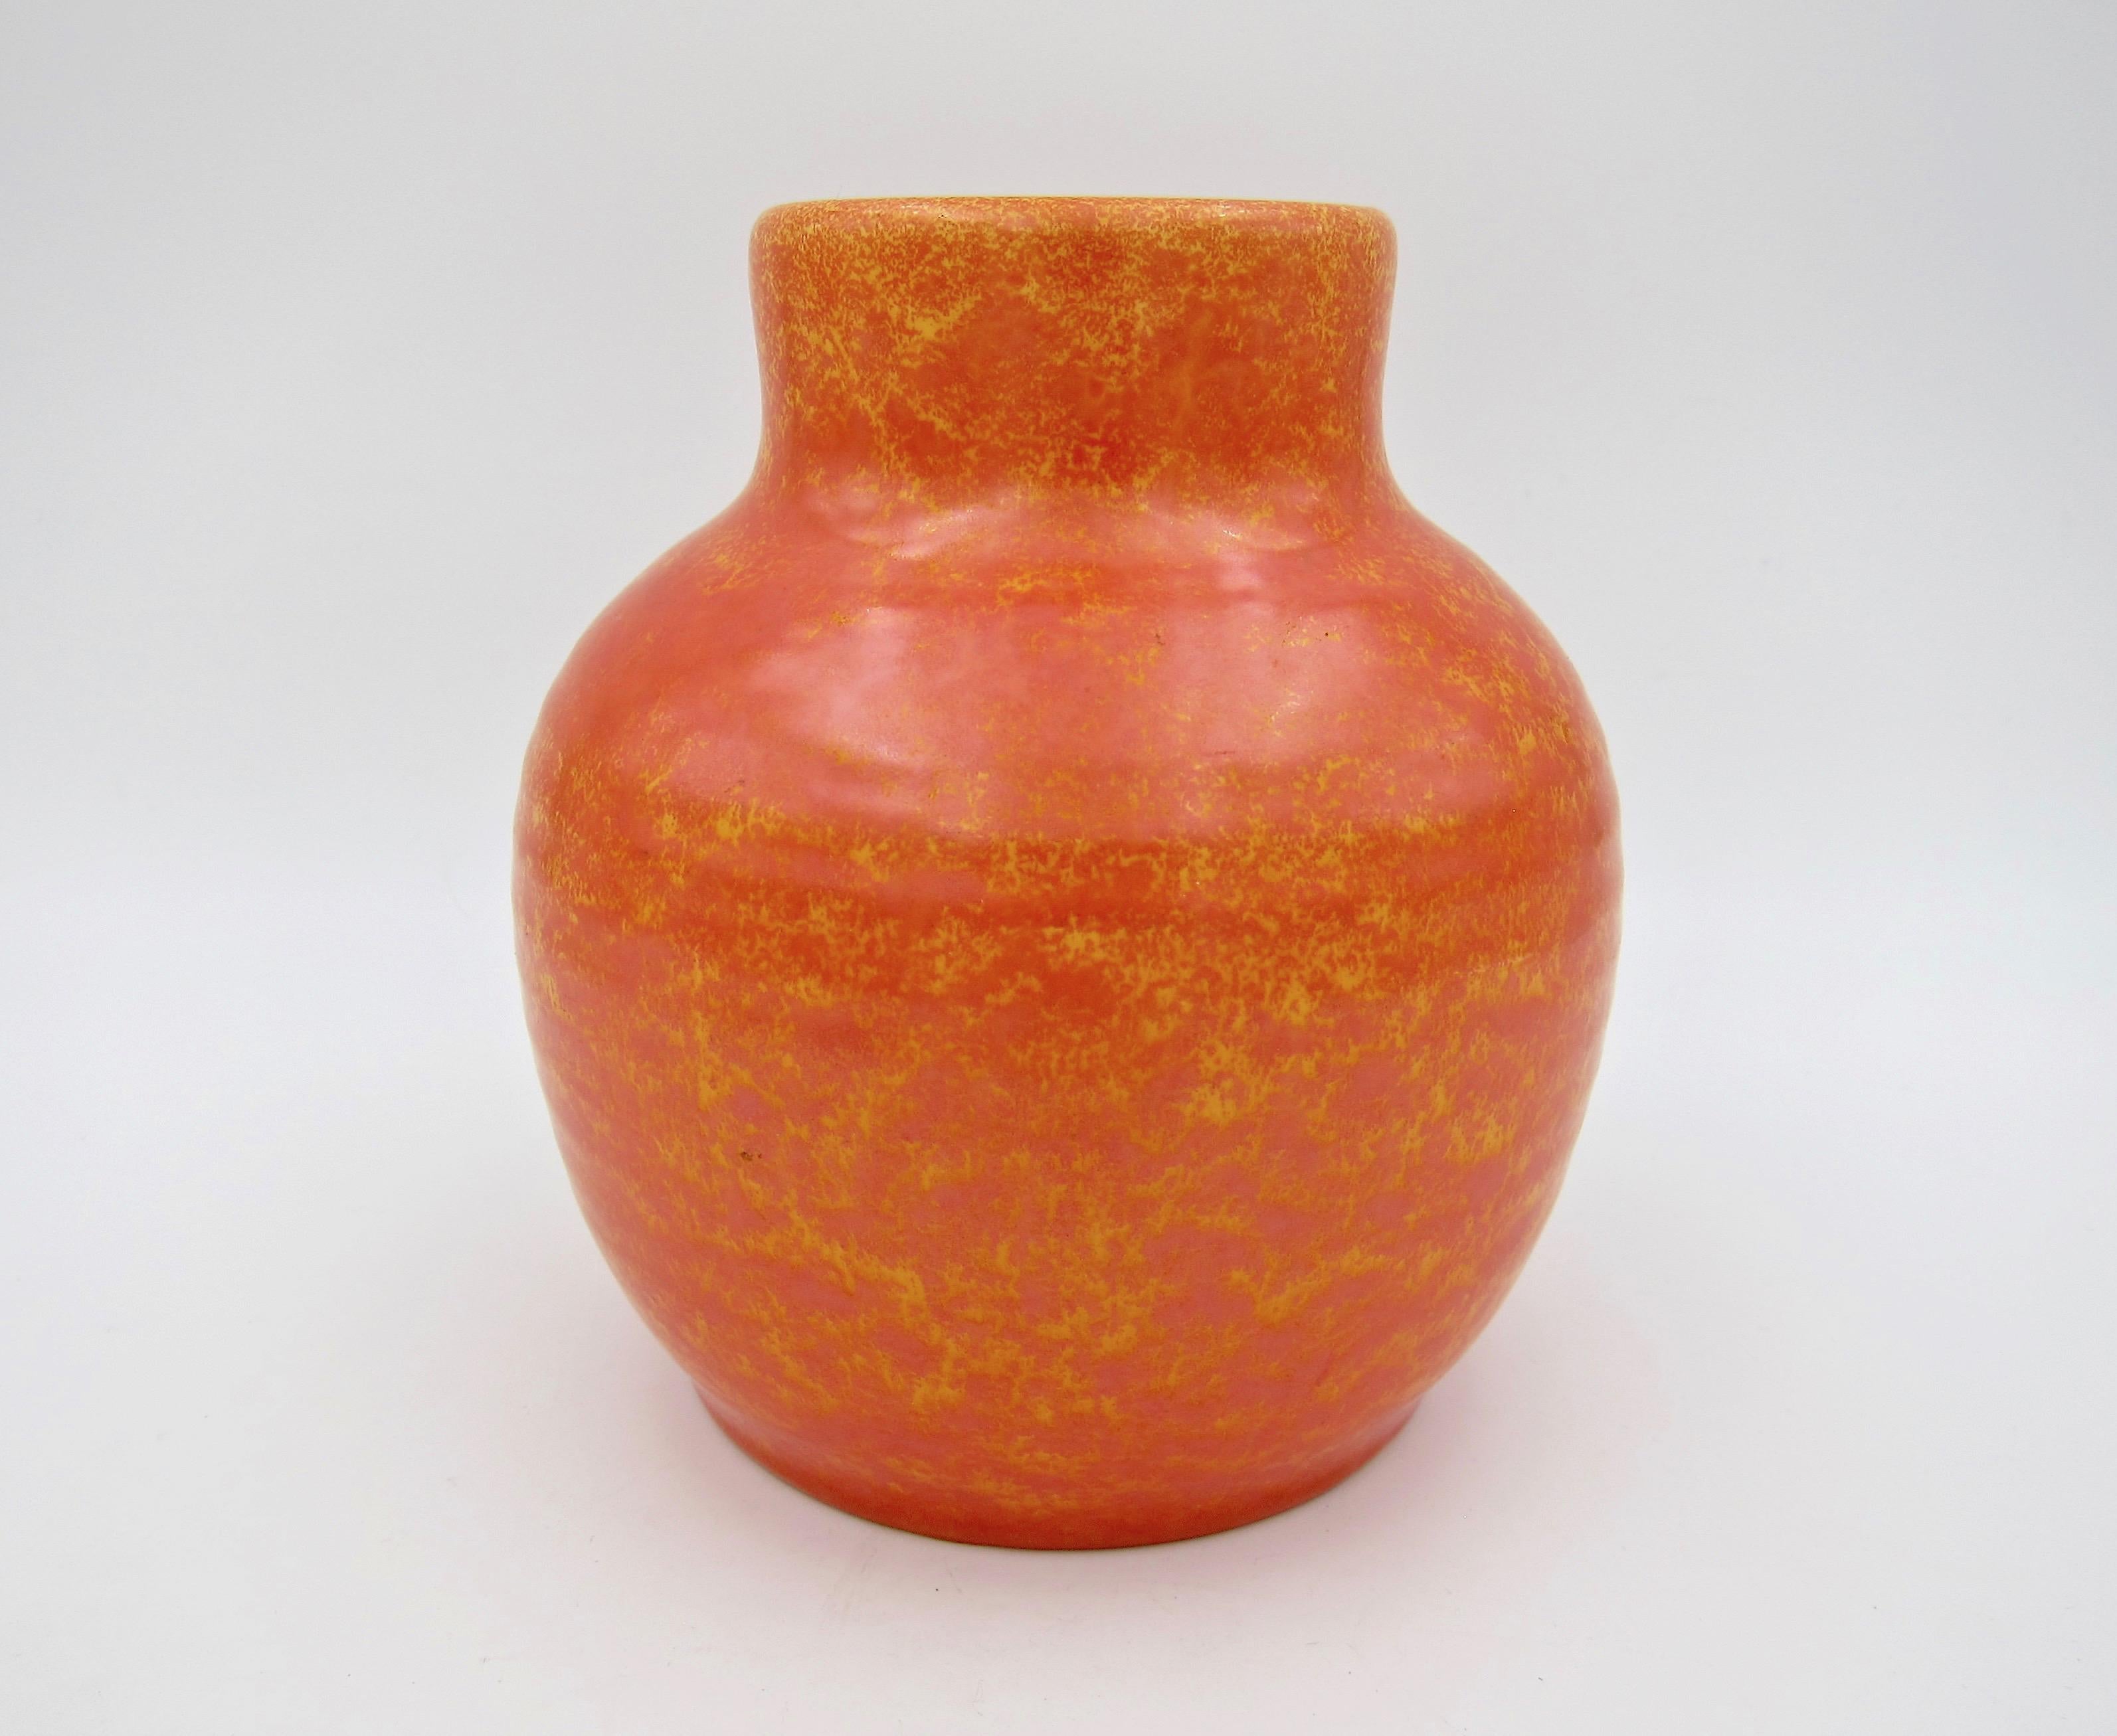 An English Royal Lancastrian art pottery vase with a bold orange vermilion glaze by Edward Thomas Radford dating circa 1920-1933. The Art Deco vase was hand-raised and features a short cylindrical neck and ribbed ovoid body with a mottled 